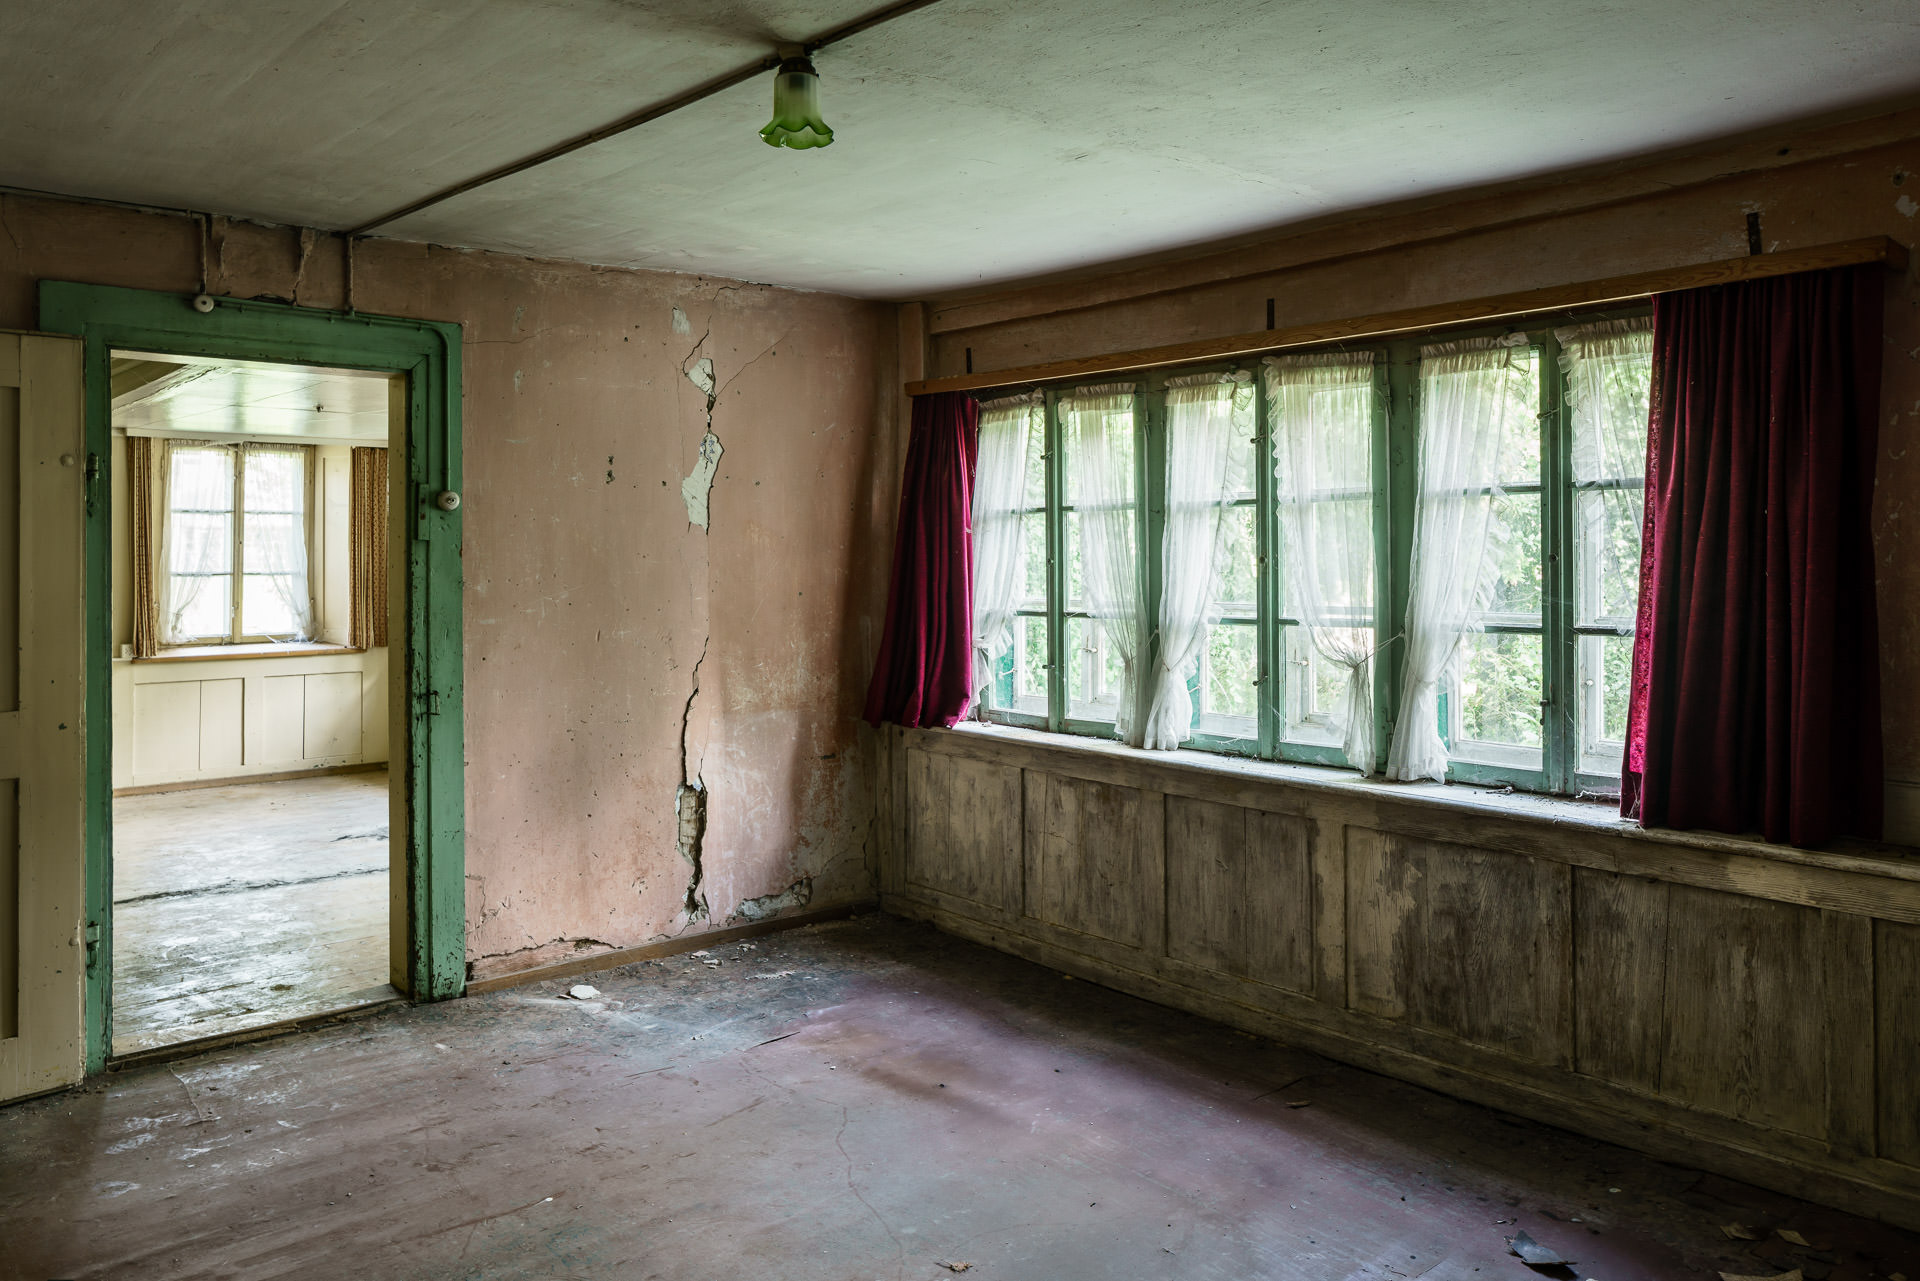 Historic building interior photography: Old abandoned building - room with windows